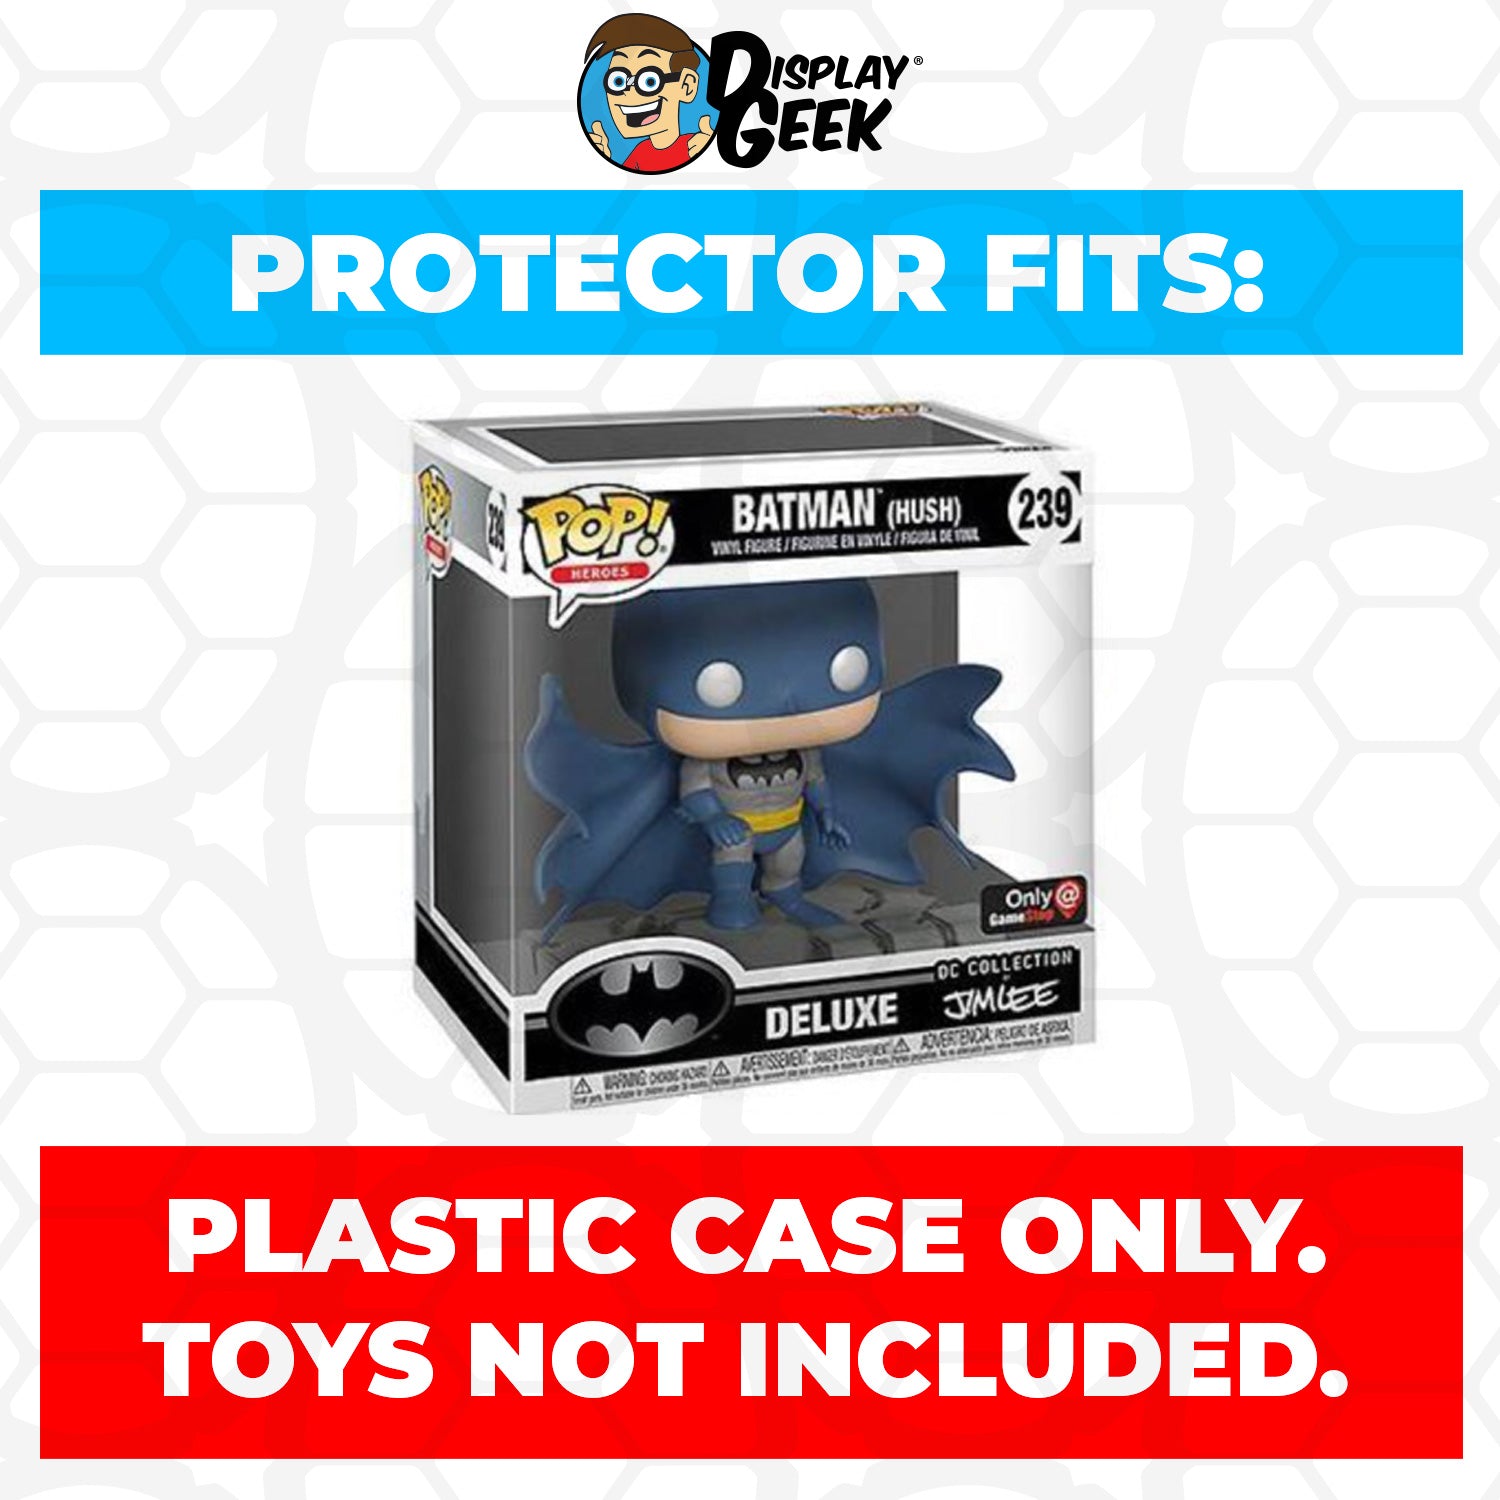 Pop Protector for Batman Hush Jim Lee Blue #239 Funko Pop Deluxe - PPG Pop Protector Guide Search Created by Display Geek